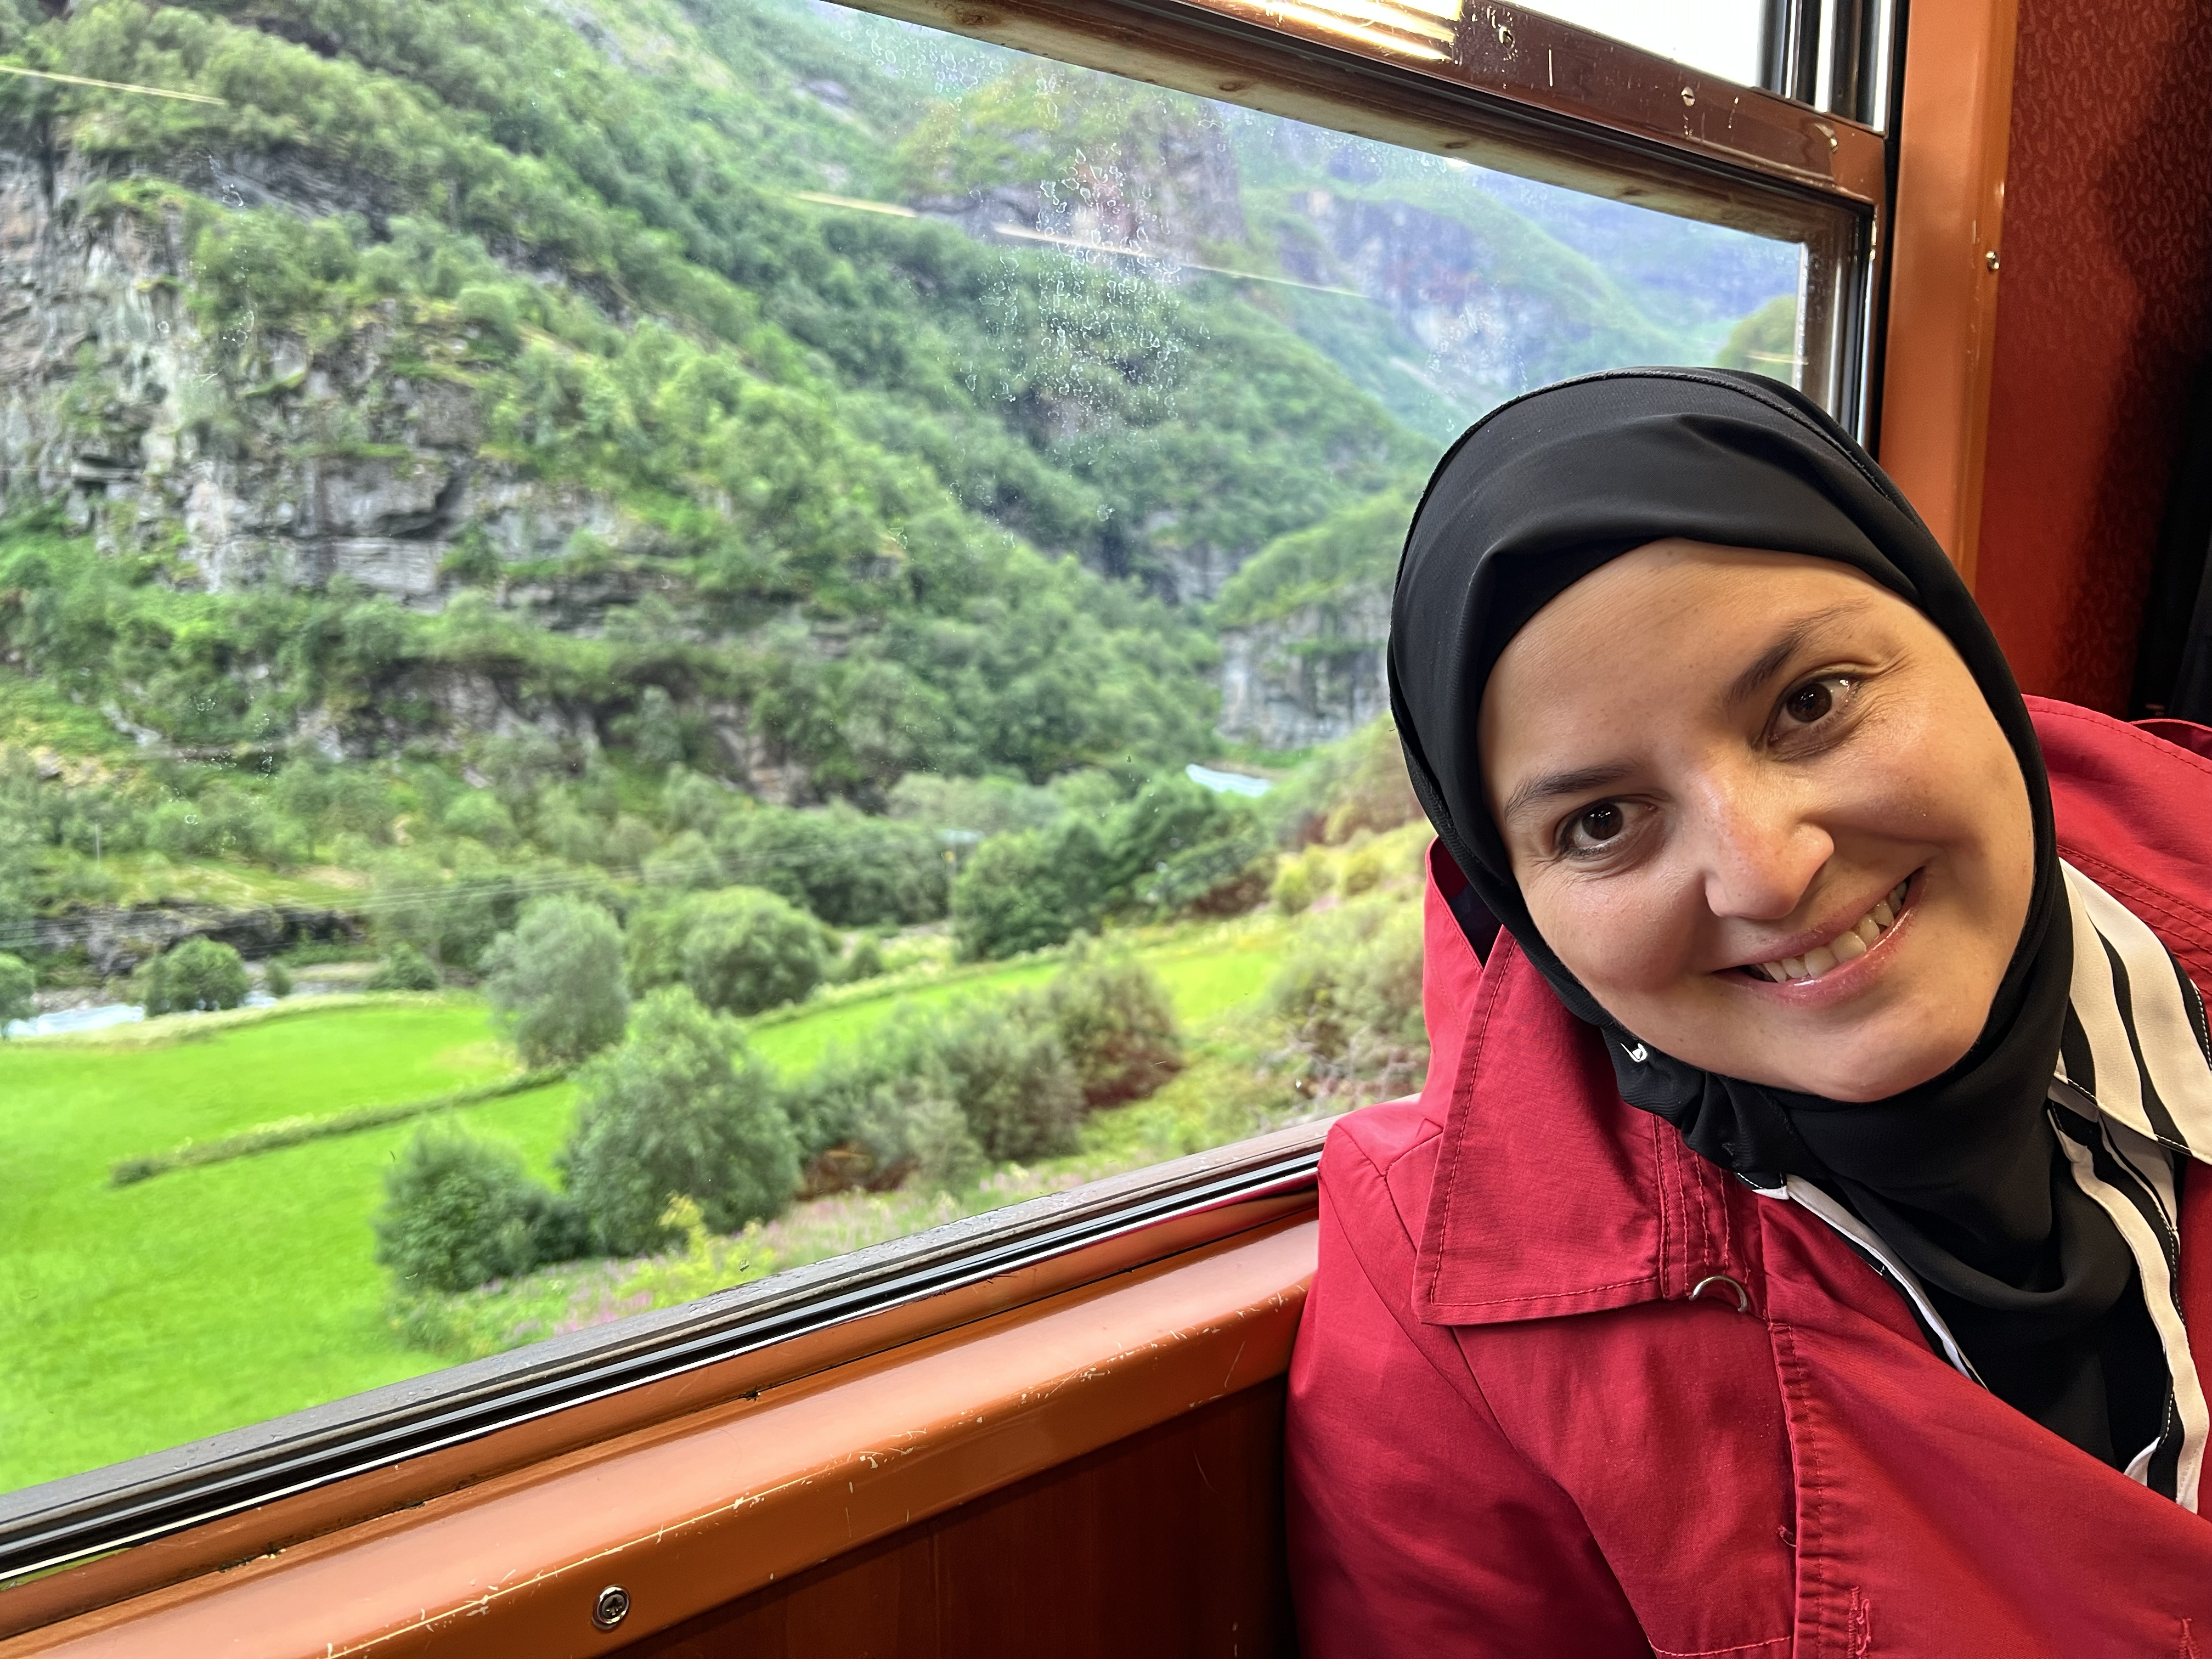 A picture of mona wearing a bright red coat and a black headscarf. She is seated inside a train in her seat and outside the window we are able to see green pastures and hills. She is leaning forward and smiling towards the camera.